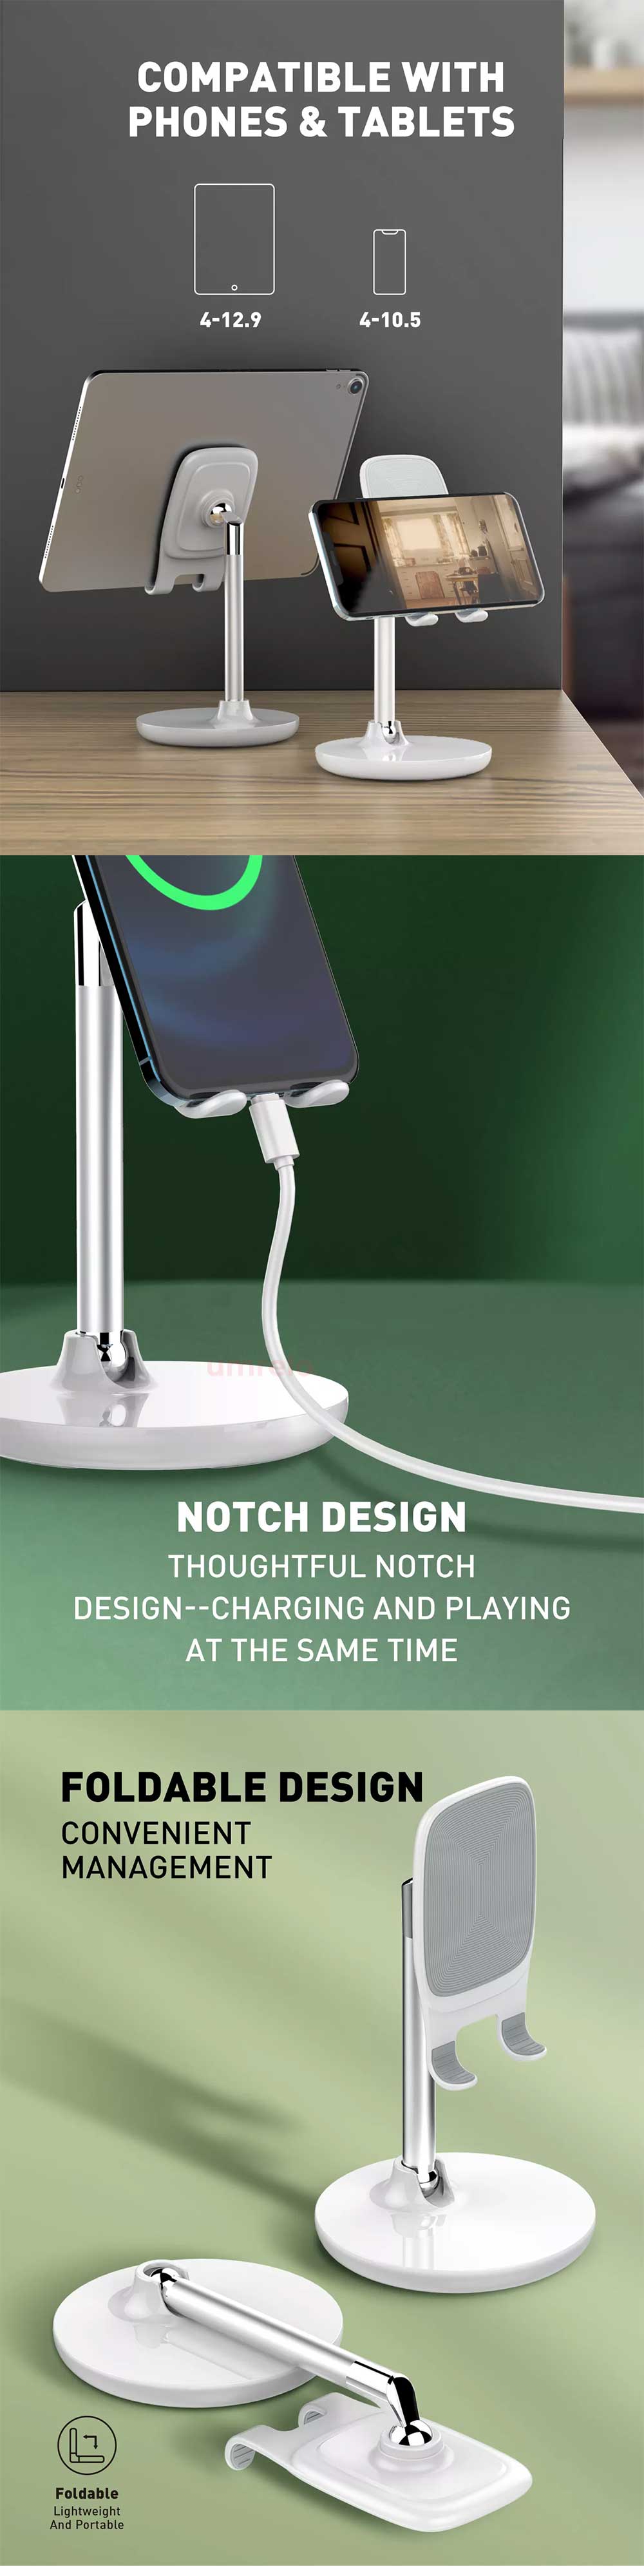 LDNIO MG05 Foldable Desk Phone Stand 5